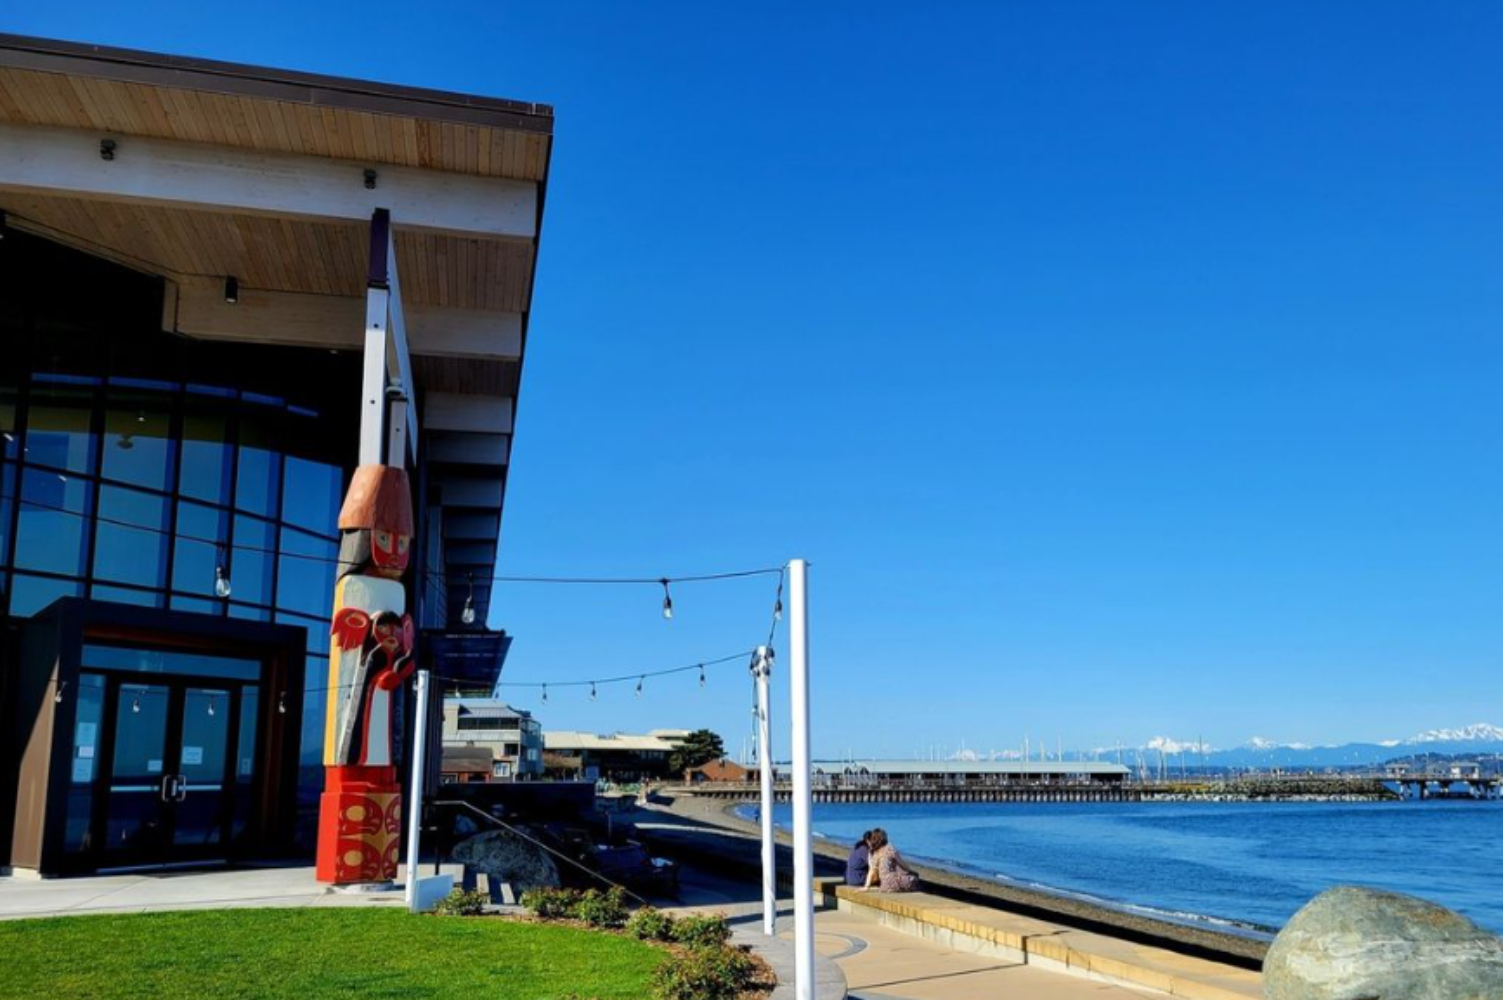 An image of the Edmonds Waterfront Center and view.